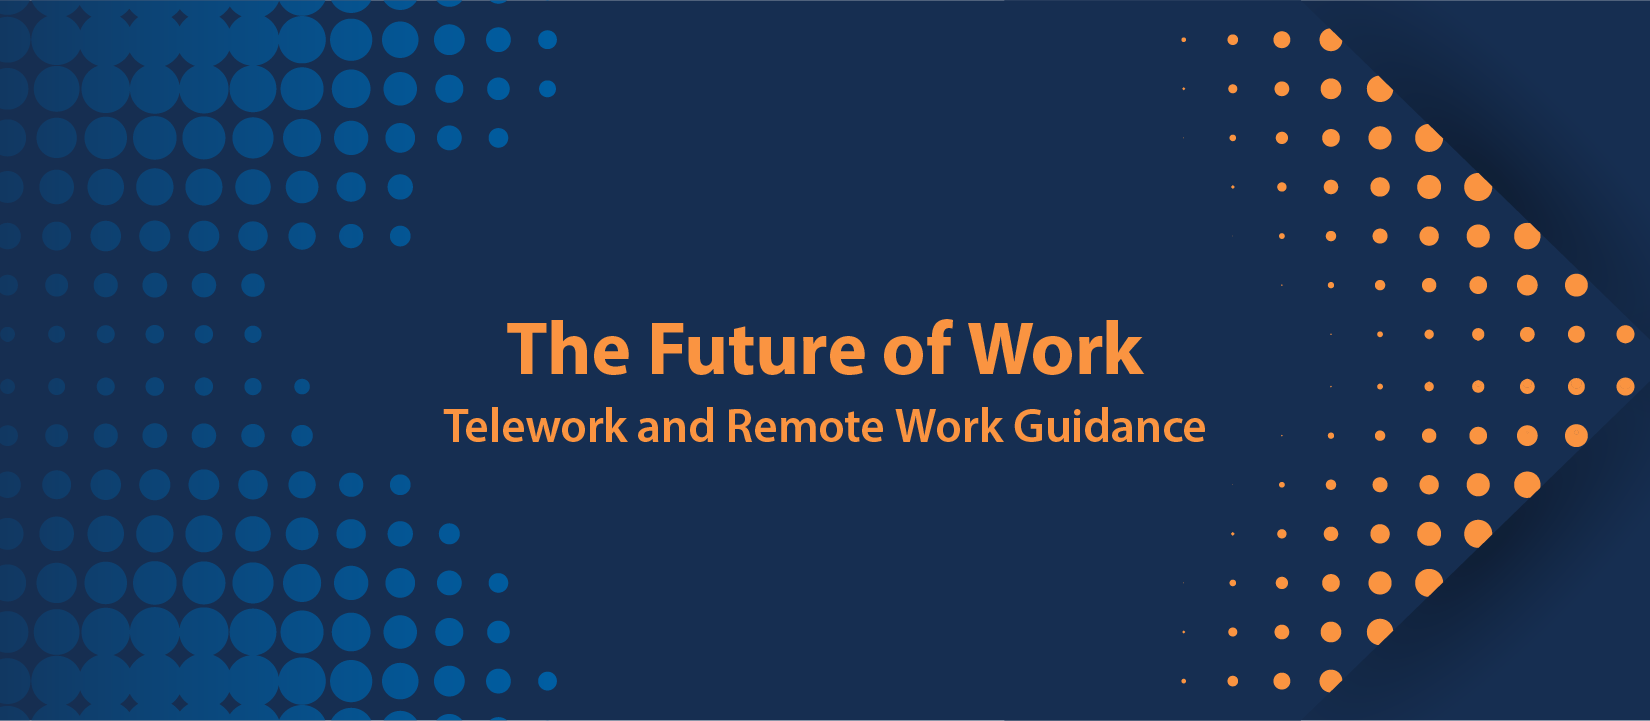 The Future of Work Telework and Remote Guidance text in orange on a blue background